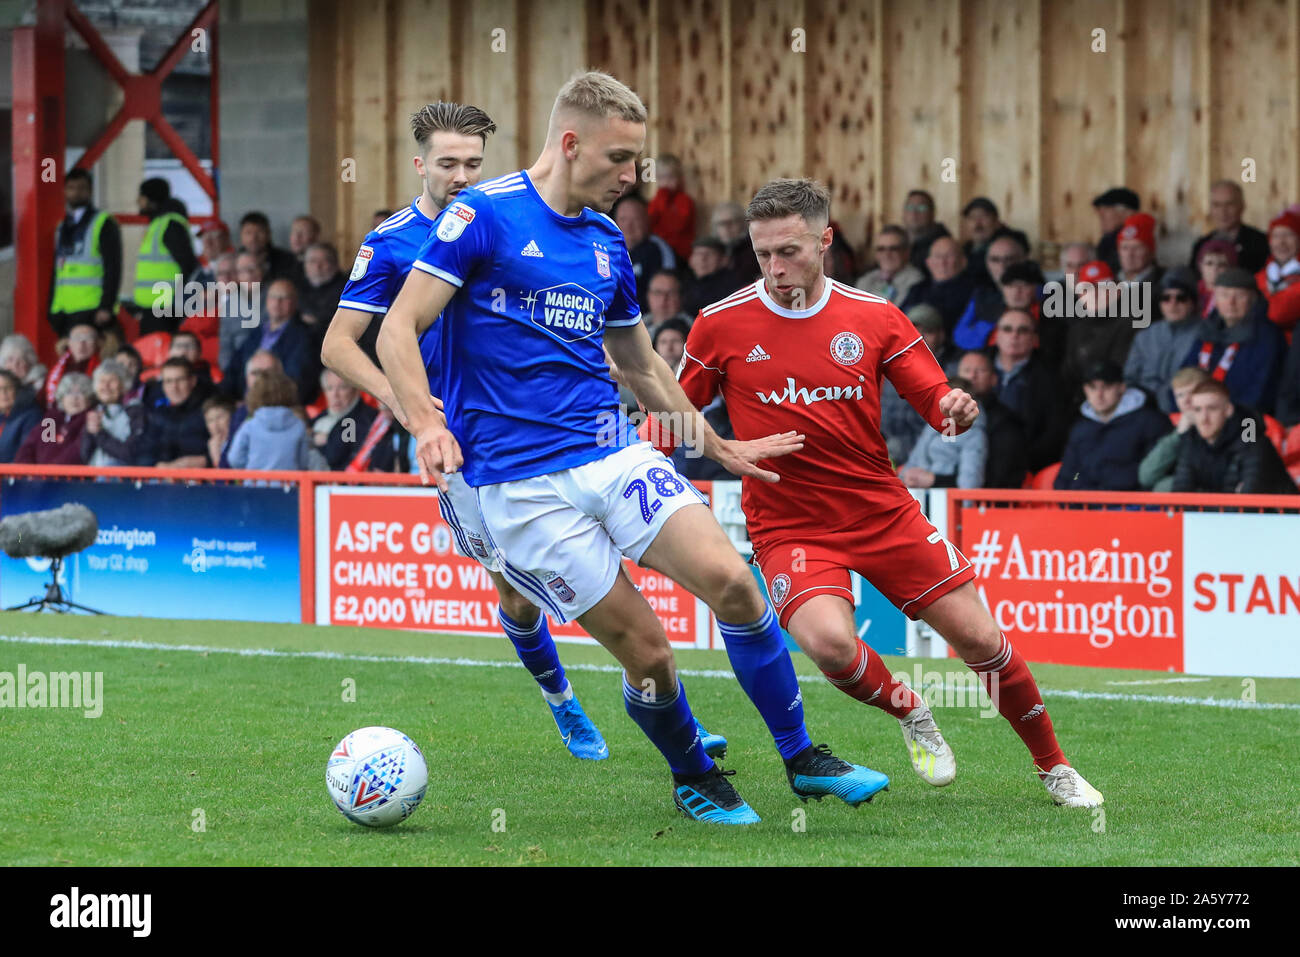 20th October 2019, The Wham Stadium, Accrington, England; Sky Bet League 1, Accrington Stanley v Ipswich Town : Jordan Clark of Accrington Stanley slips the ball past Luke Woolfenden of Ipswich Town before crossing the ball into the box  Credit: Mark Cosgrove/News Images Stock Photo